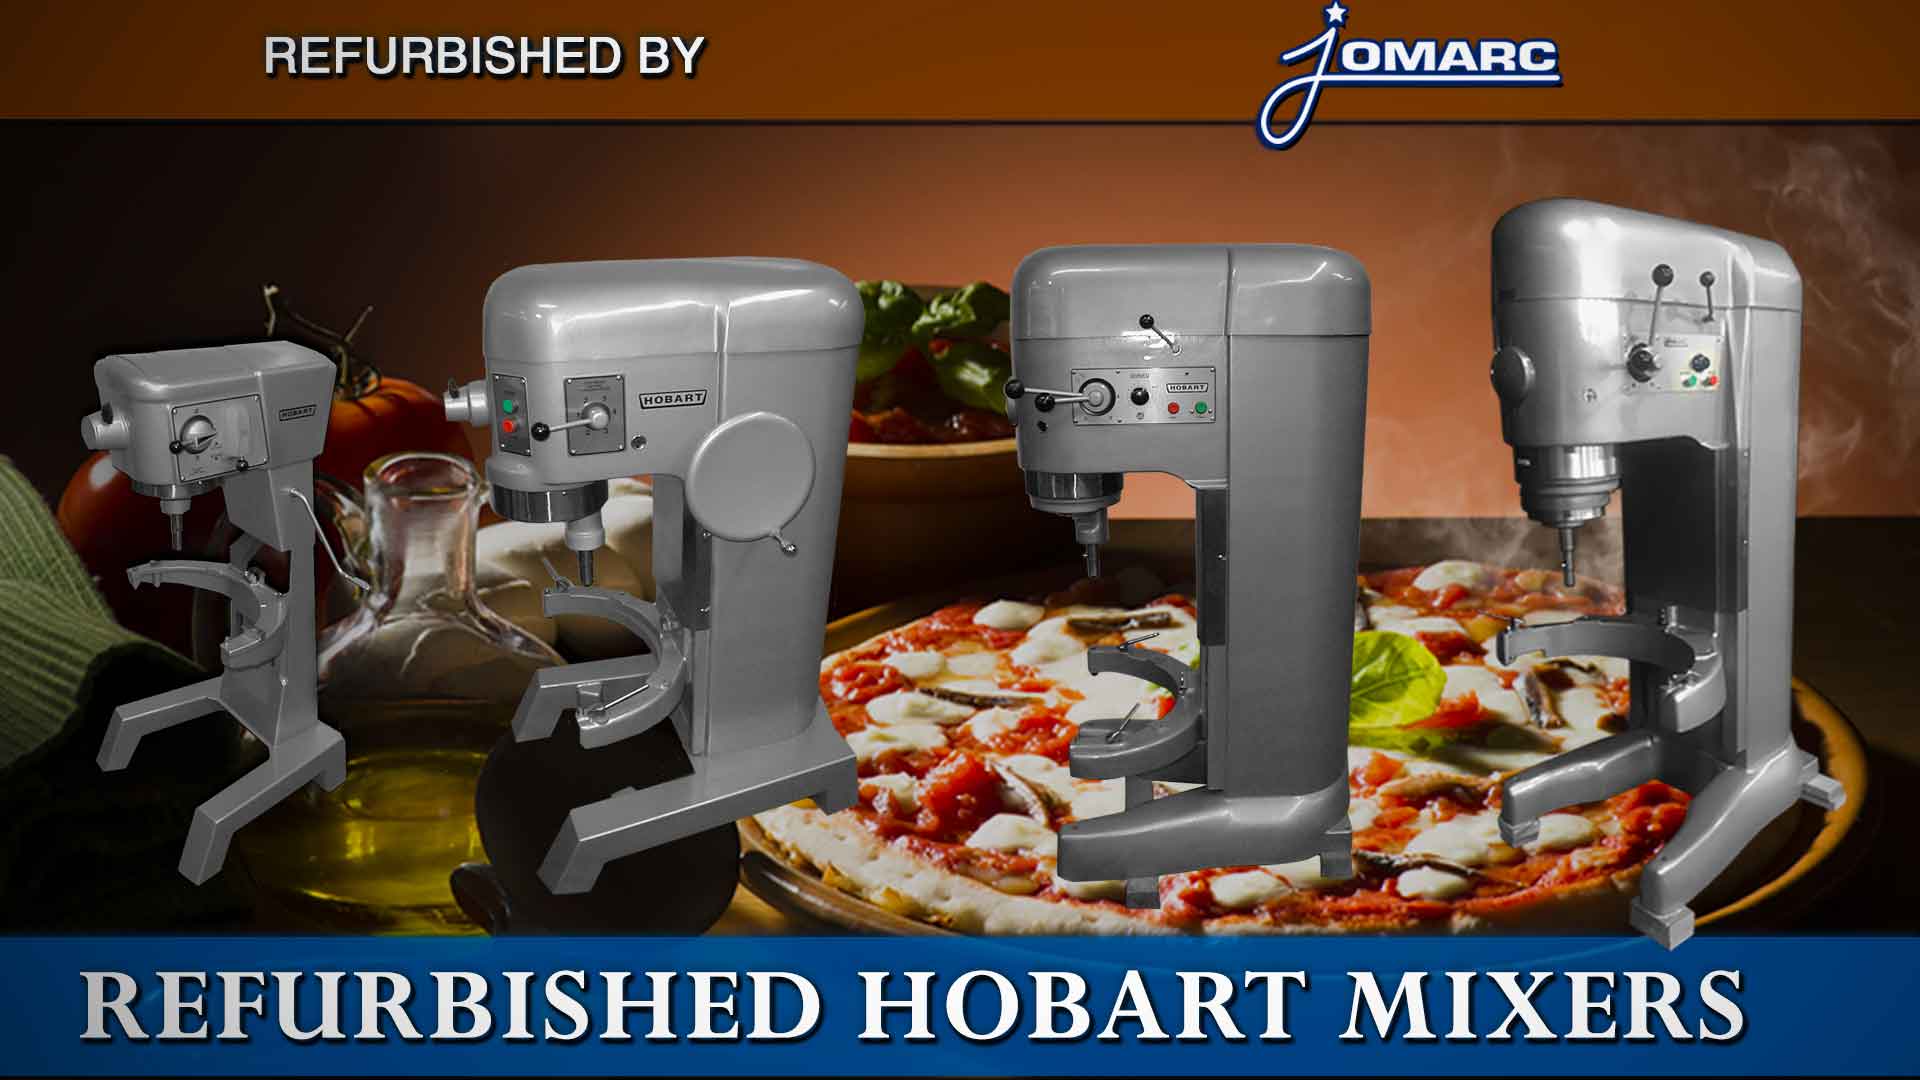 Save thousands by buying a refurbished mixer by Jomarc. Jomarc refurbishes used Hobart mixers to original factory finish. They are guaranteed and in pristine condition. We will ship to US, Canada, Quebec & France. Freight Shipping Rates added to price. Click here for more information 